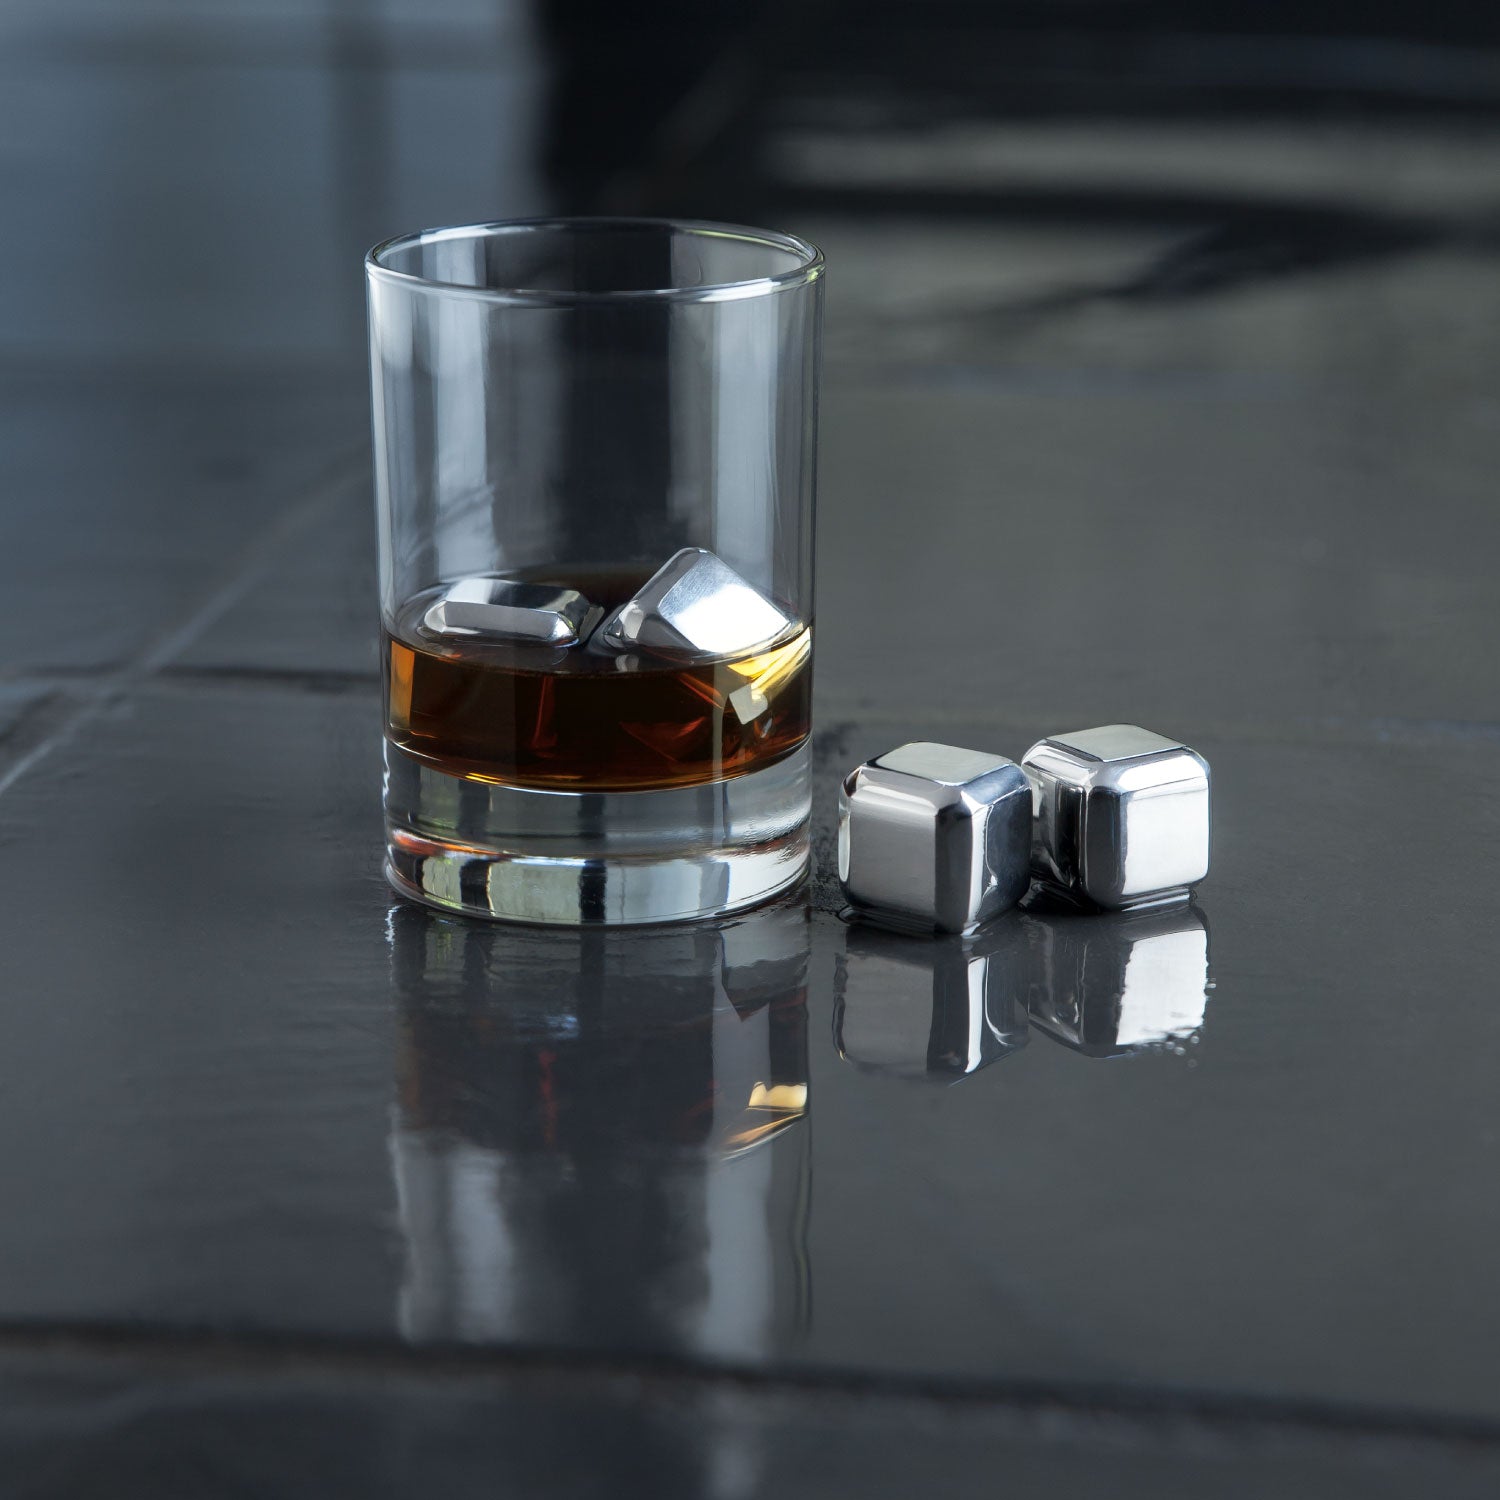 Viski Ice Cube Tray with No Spill Lid - Liquor Cocktail and Whisky